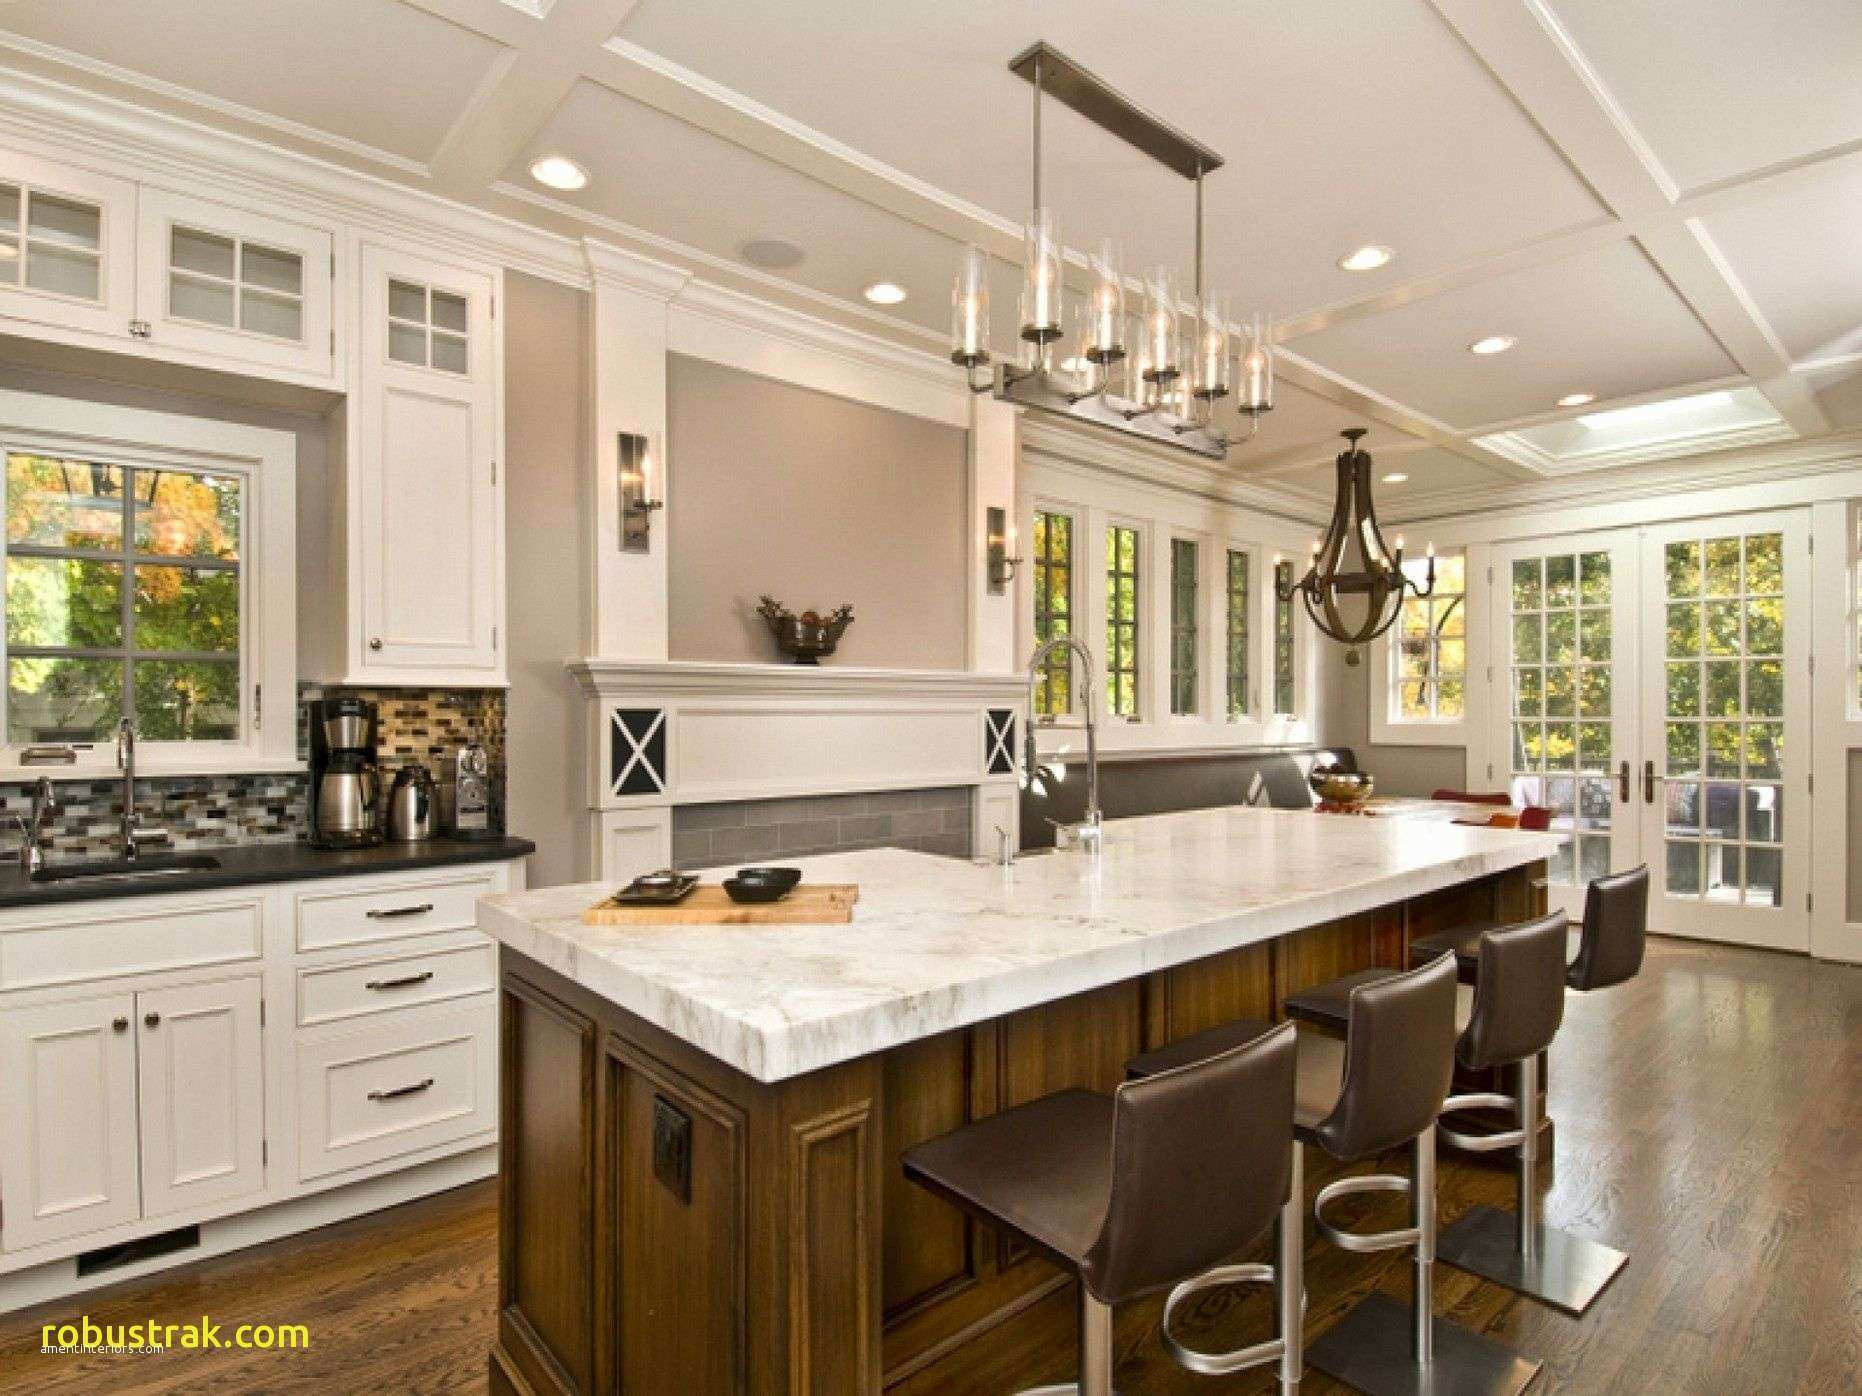 18 Lovely Houzz Living Rooms with Hardwood Floors 2023 free download houzz living rooms with hardwood floors of alluring kitchen utility table styling up your pendant lighting for within alluring kitchen utility table styling up your pendant lighting for kitc